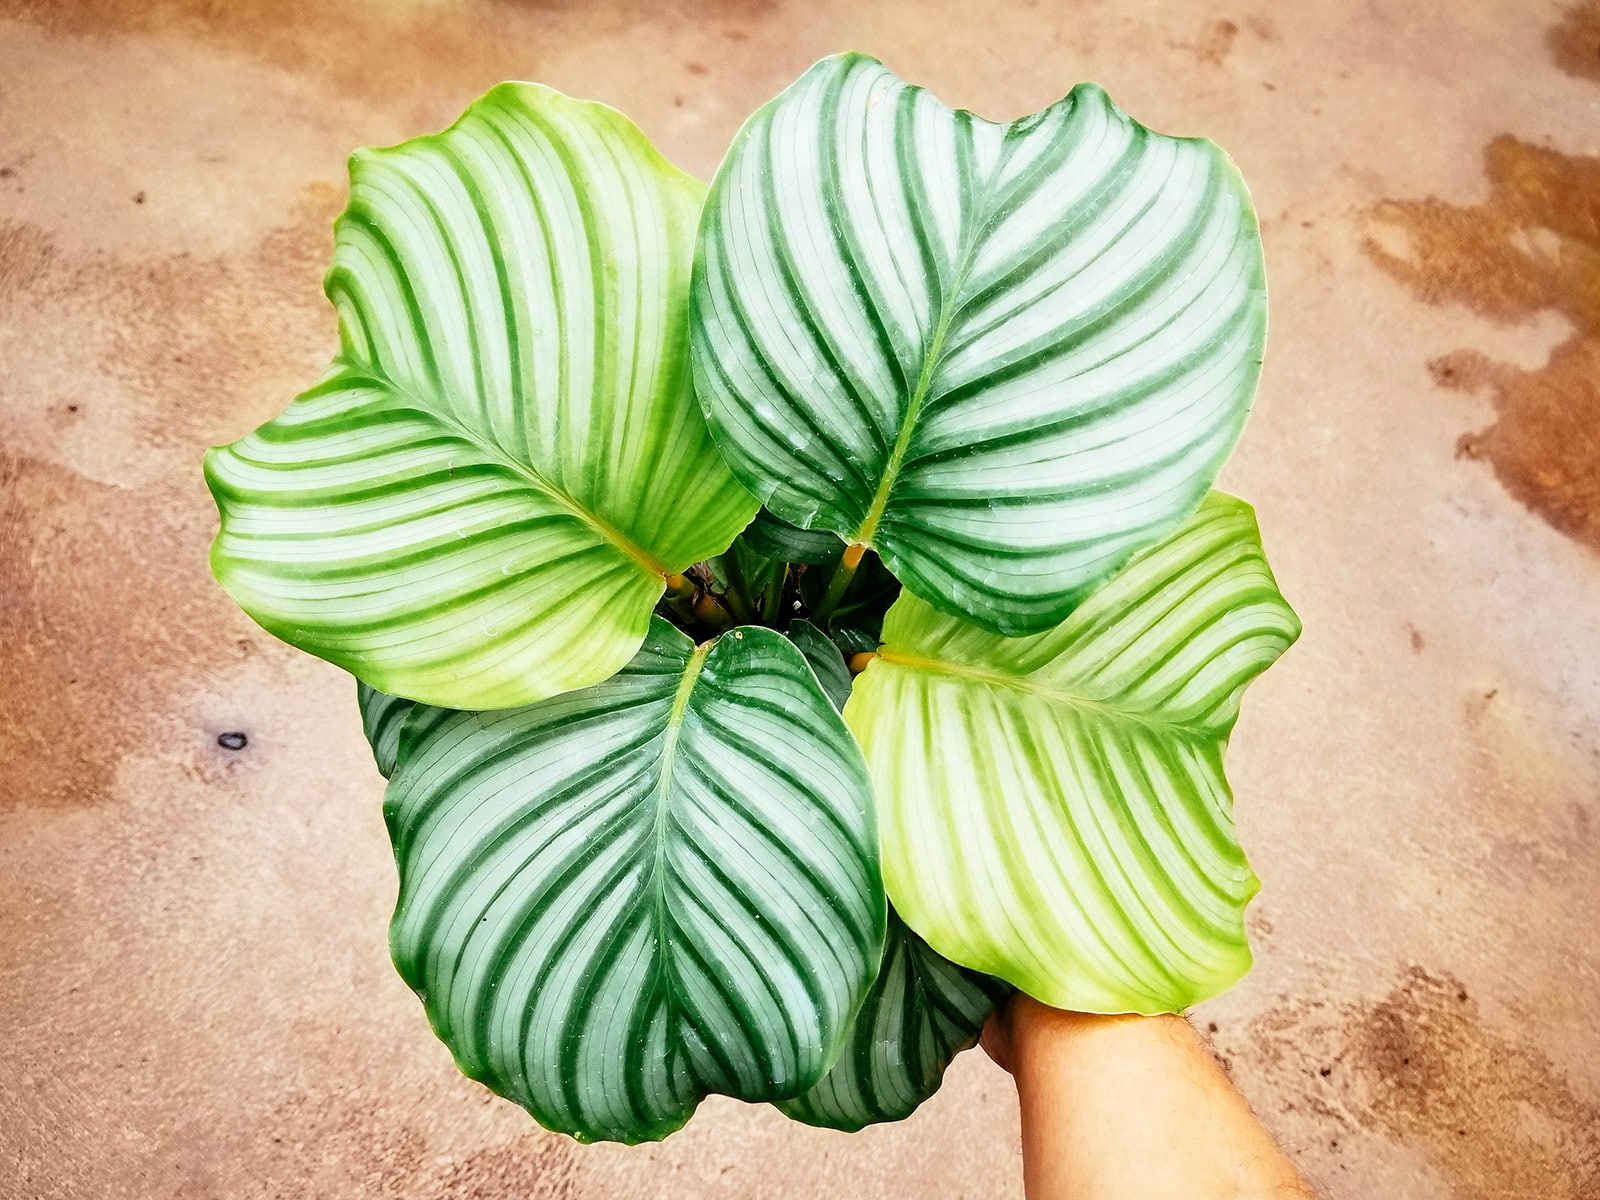 Overhead shot of an arm holding out a Calathea orbifolia plant against a rustic brown background